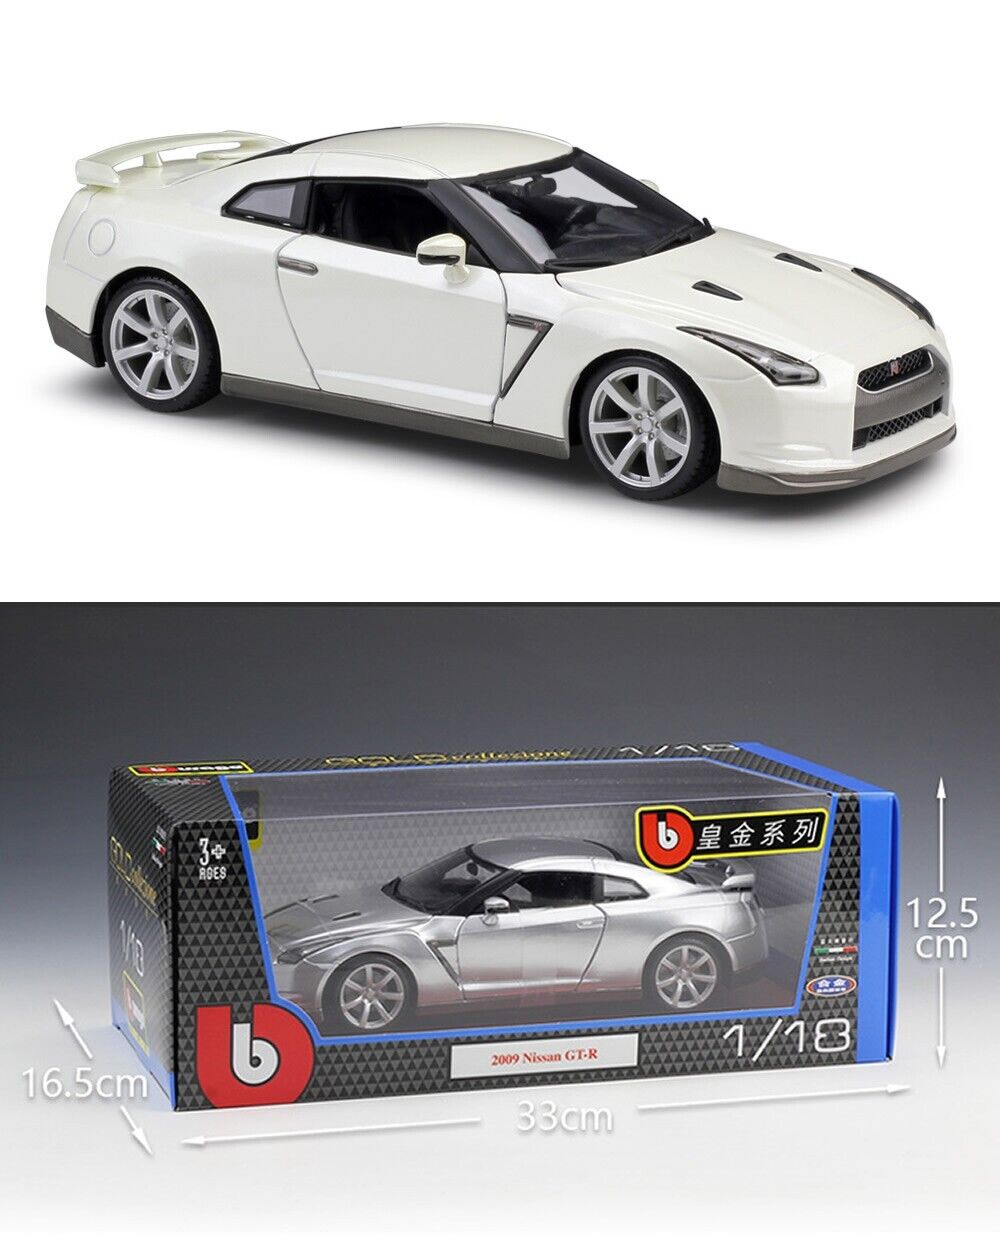 Bburago 1:18 2009 Nissan GT-R R35 Alloy Diecast vehicle Car MODEL TOY Collect